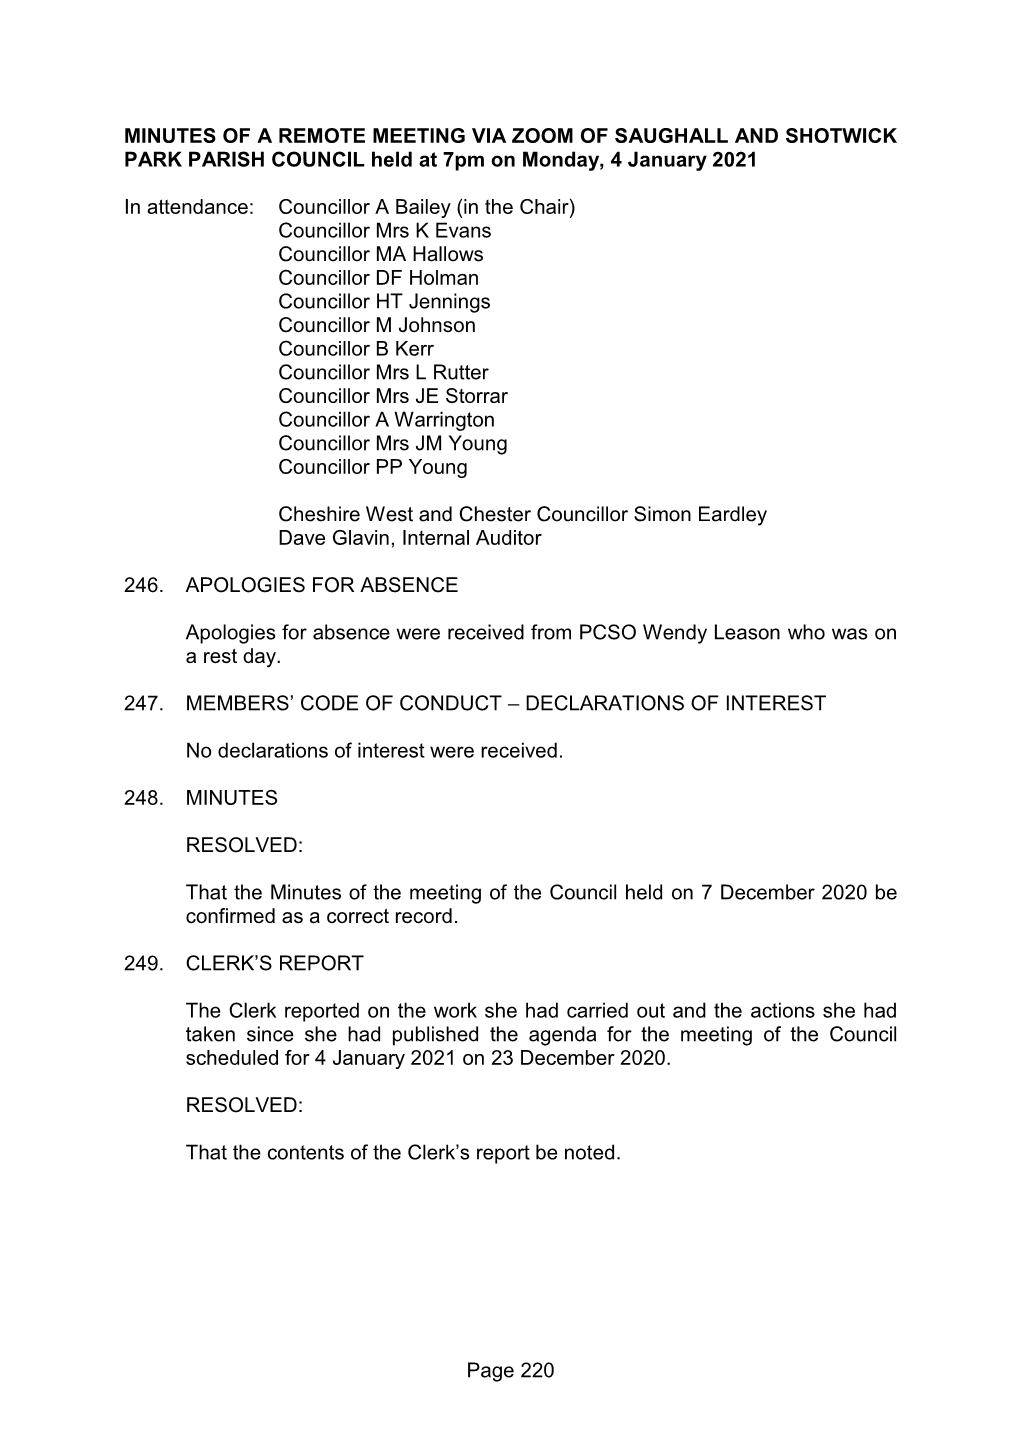 Minutes of the Council Meeting Held on 4Th January 2021